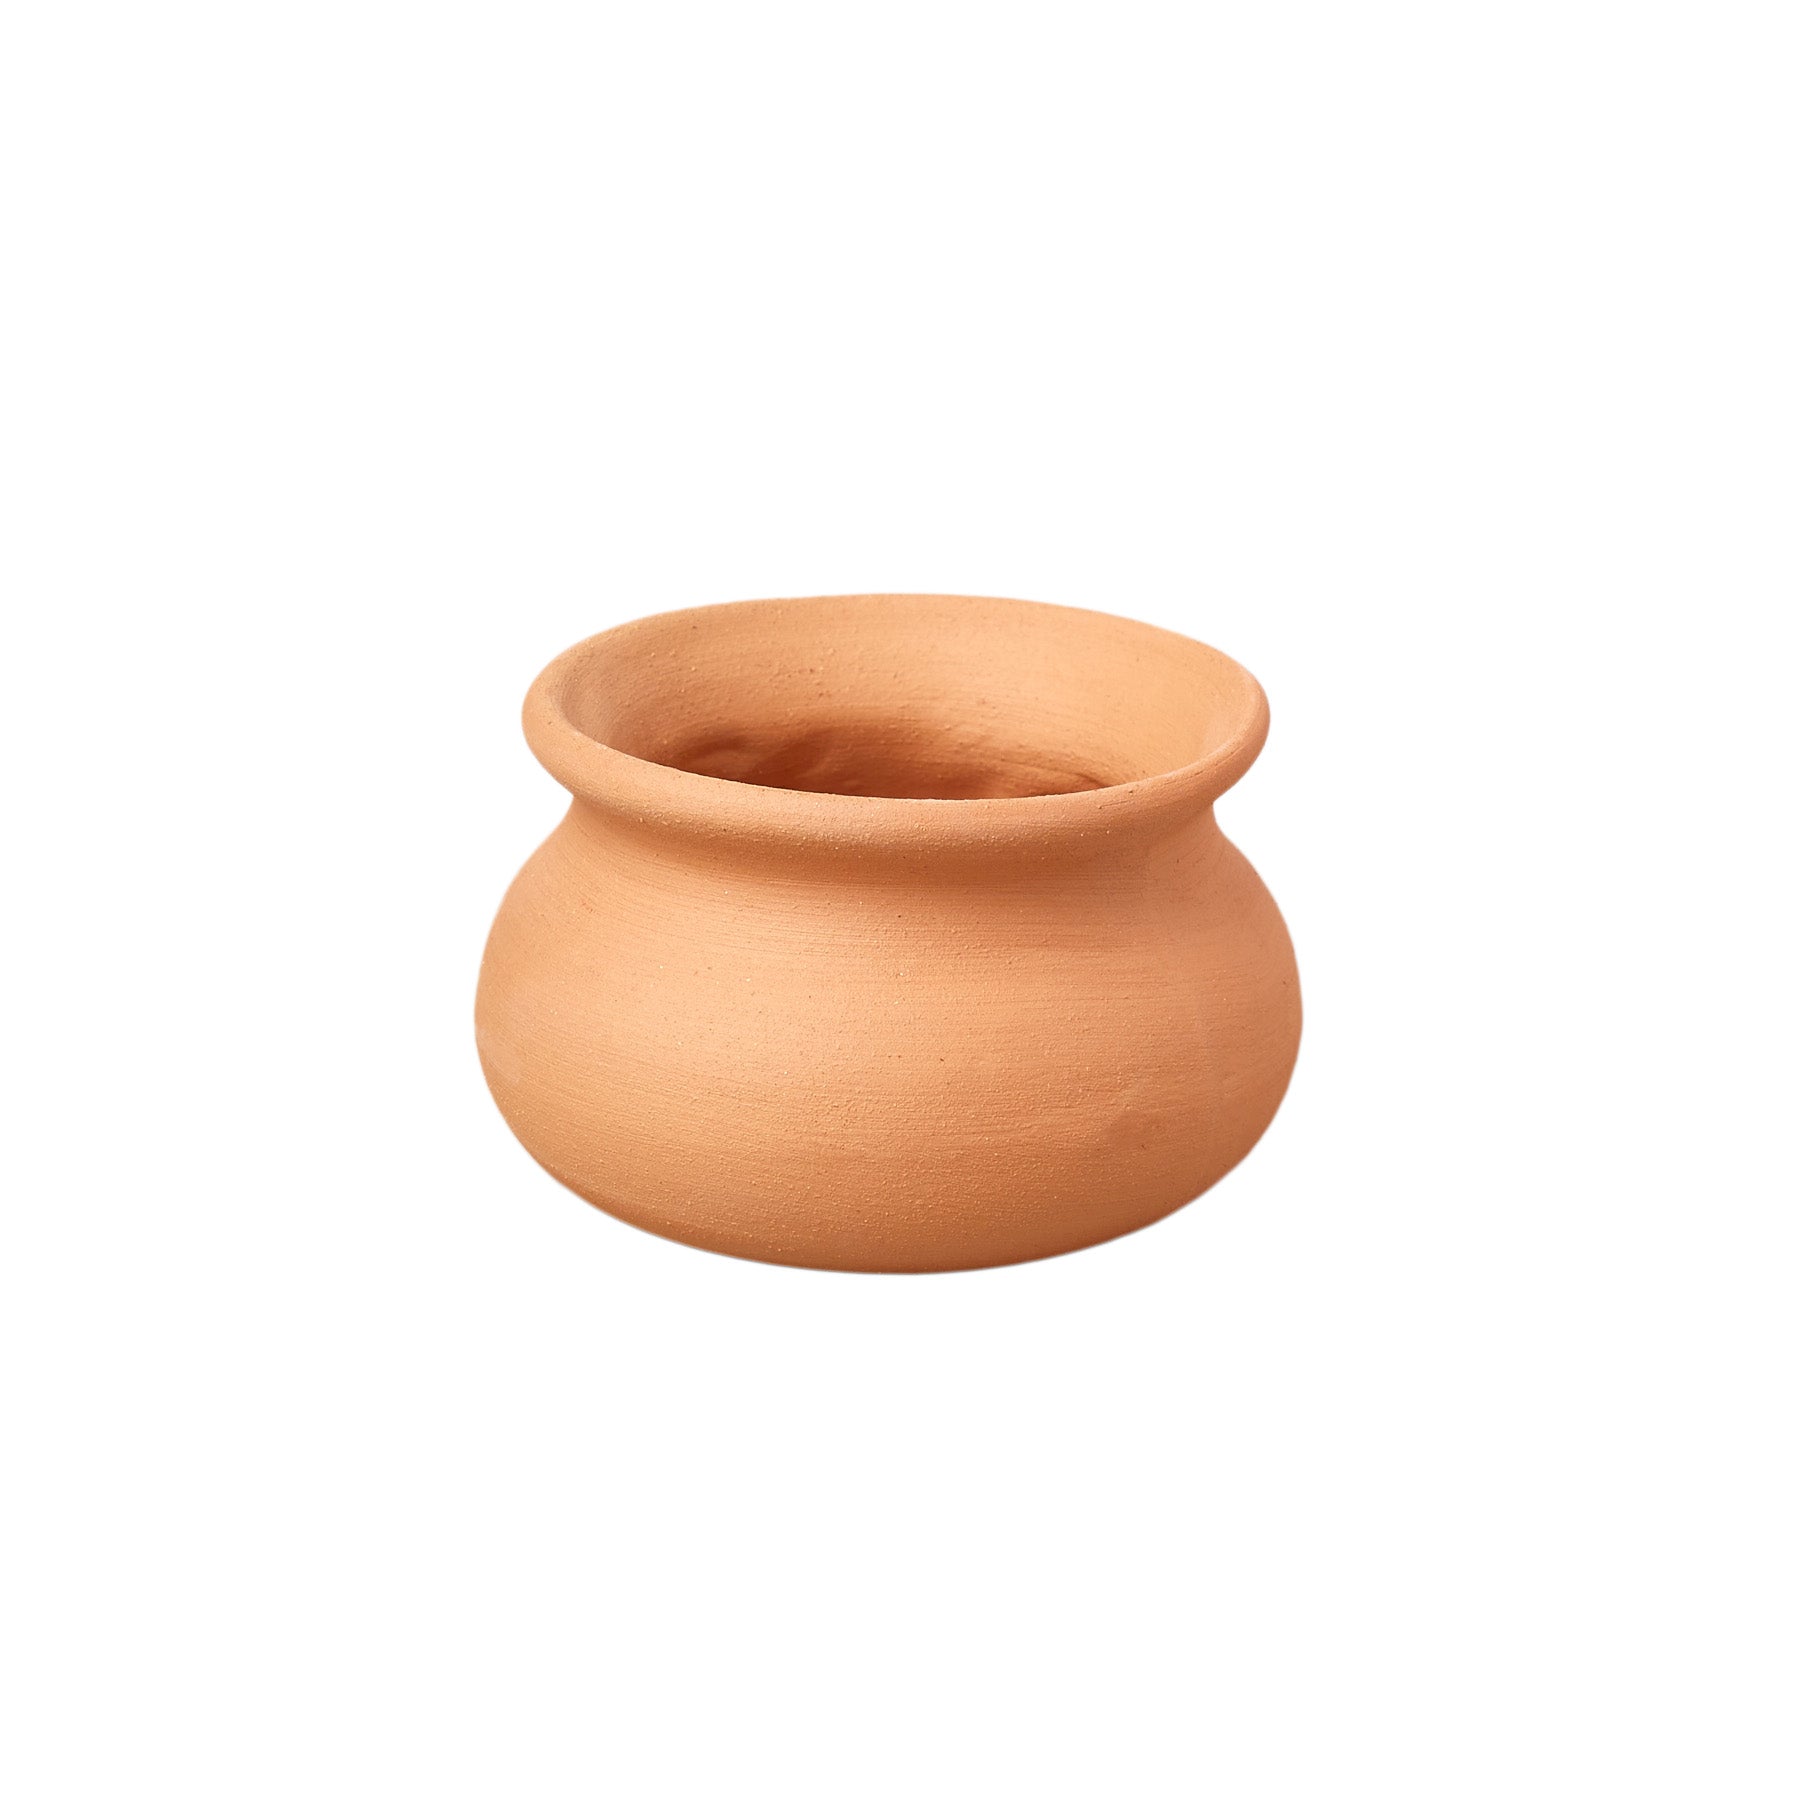 A small clay pot on a white background, sold at the best garden center near me.